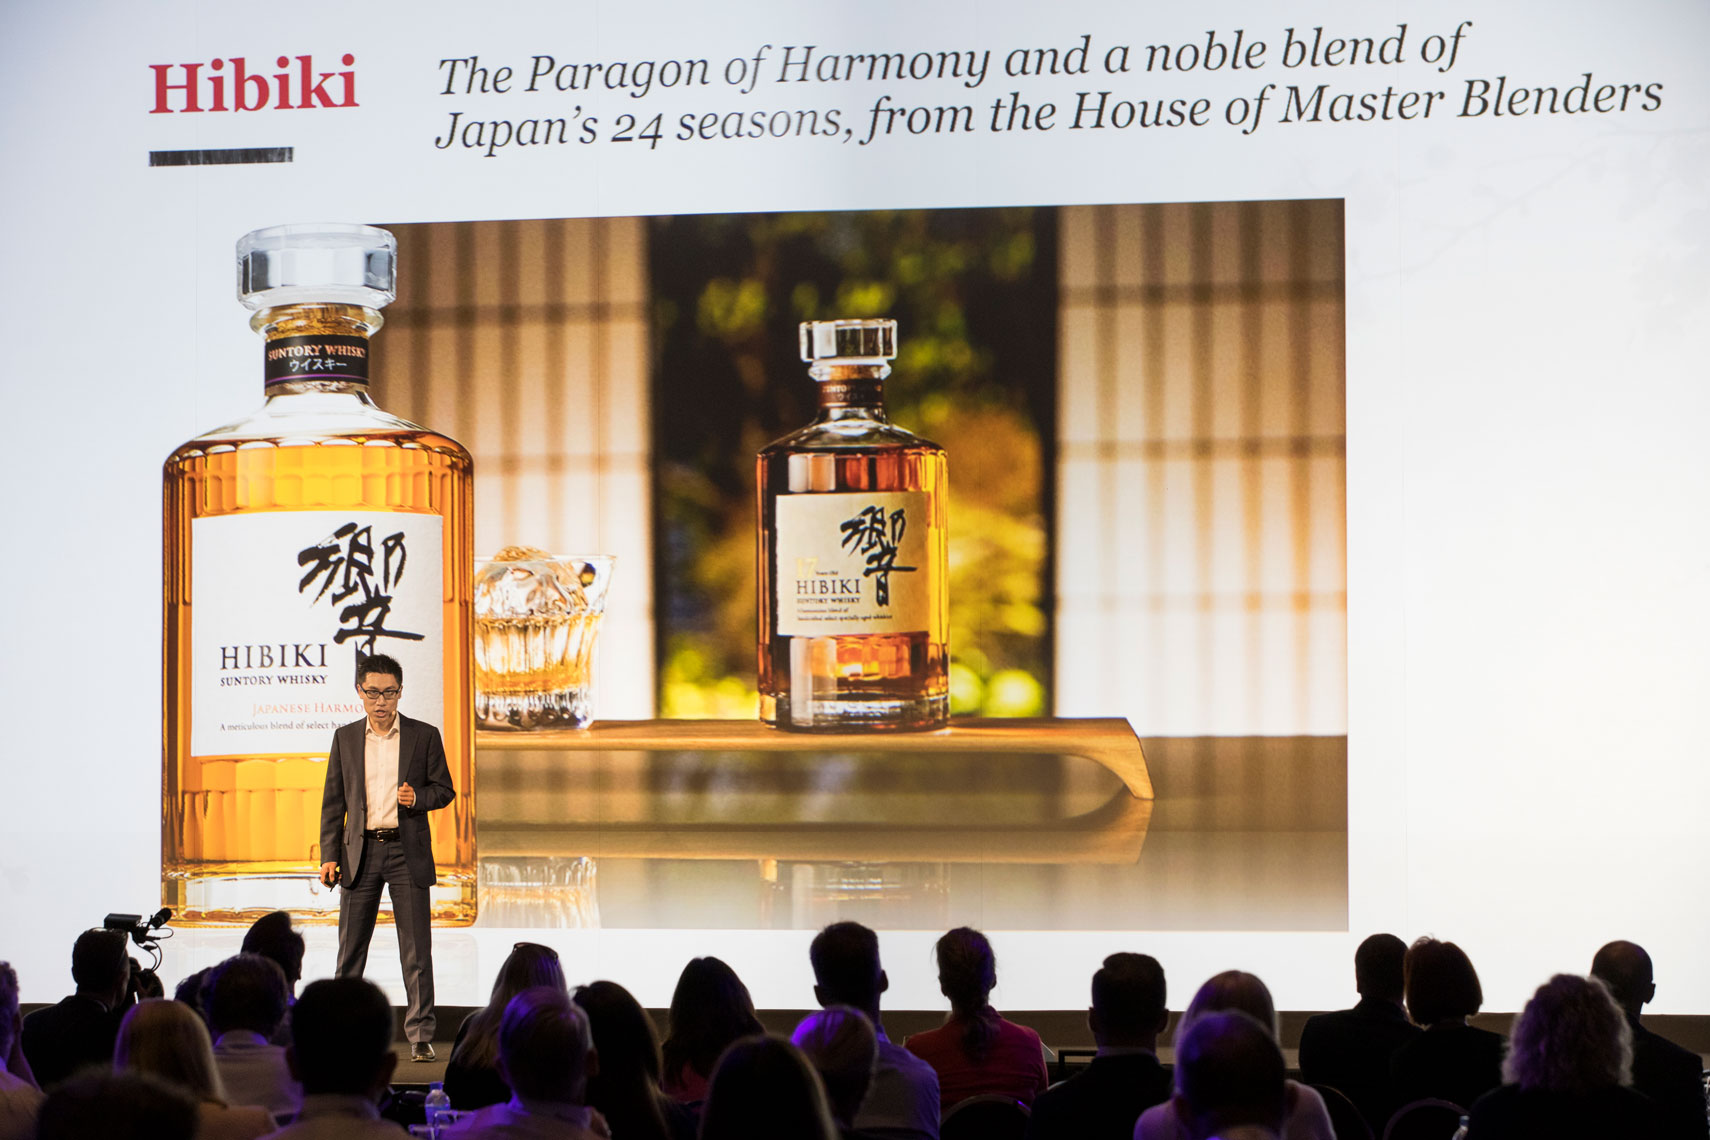 Beam Suntory World Conference in Kyoto